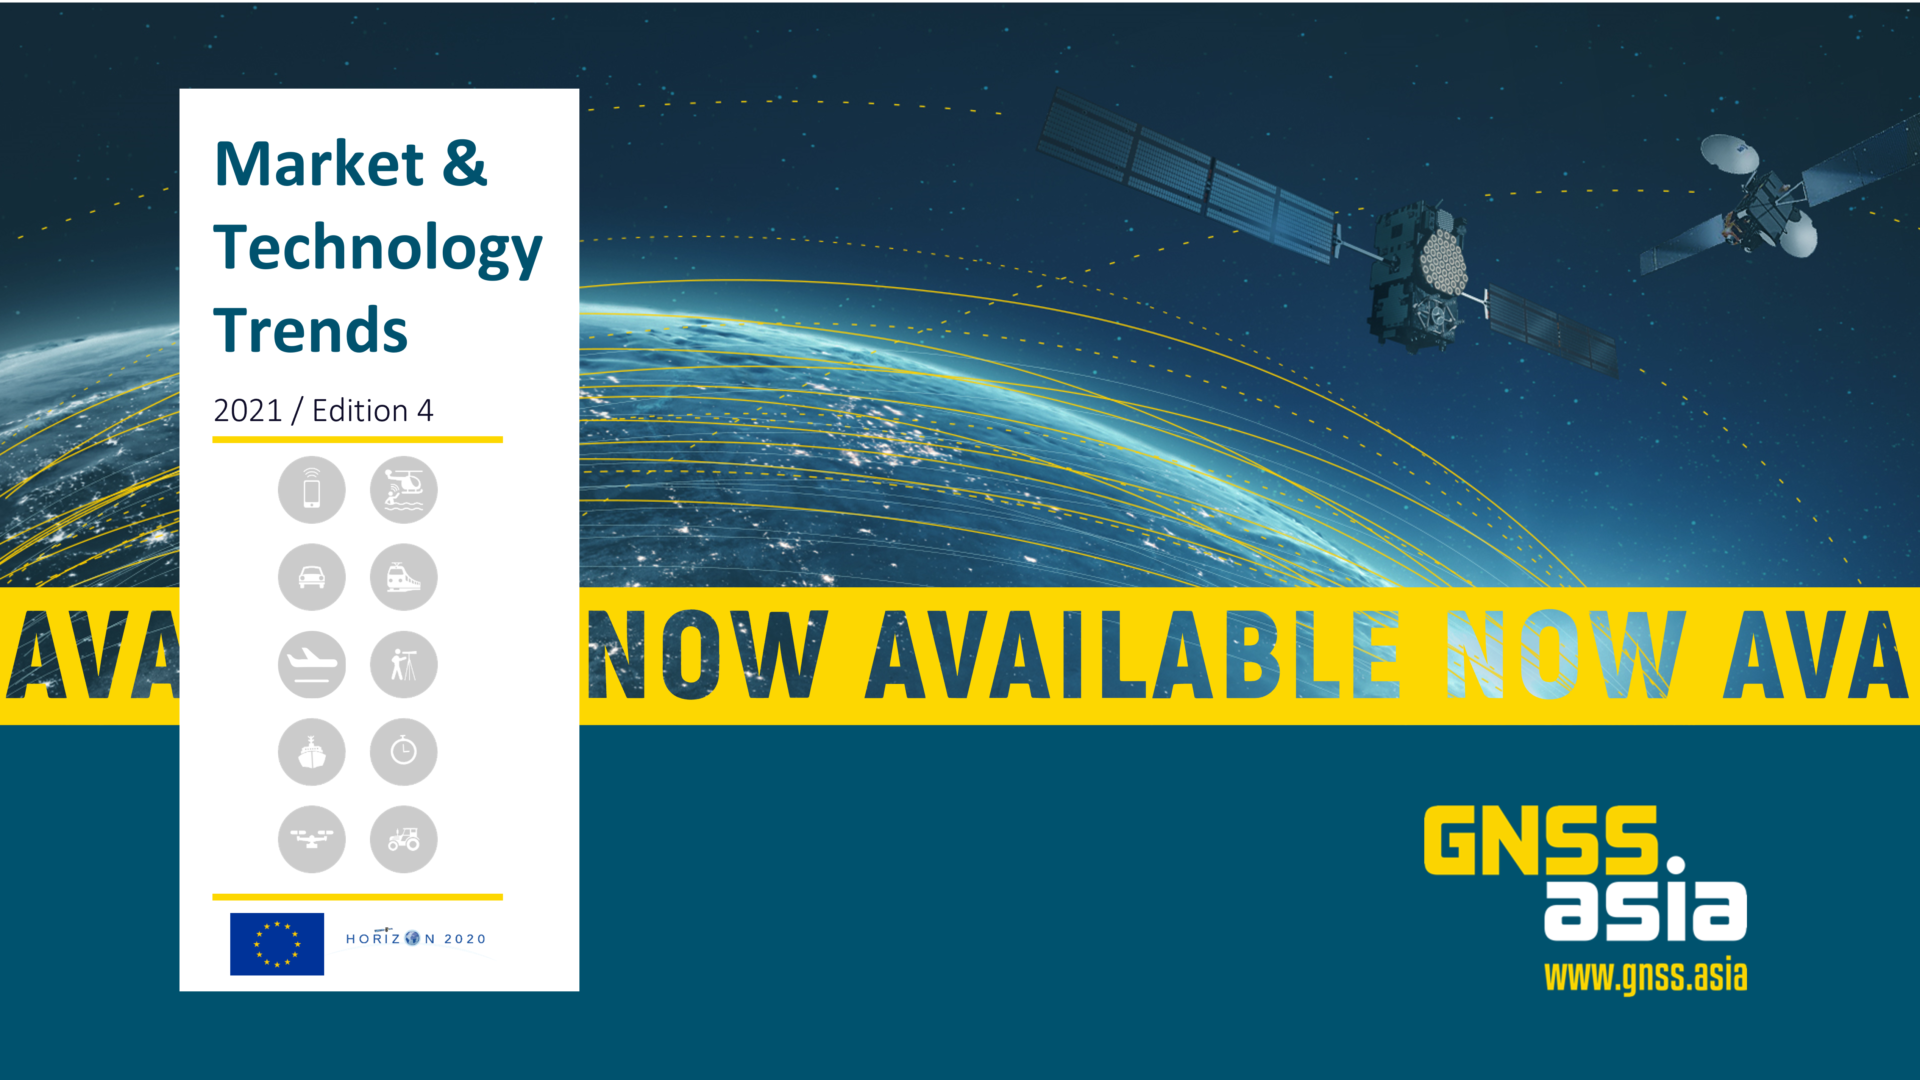 The latest Edition of the Market and Technology Trends Report is out now!